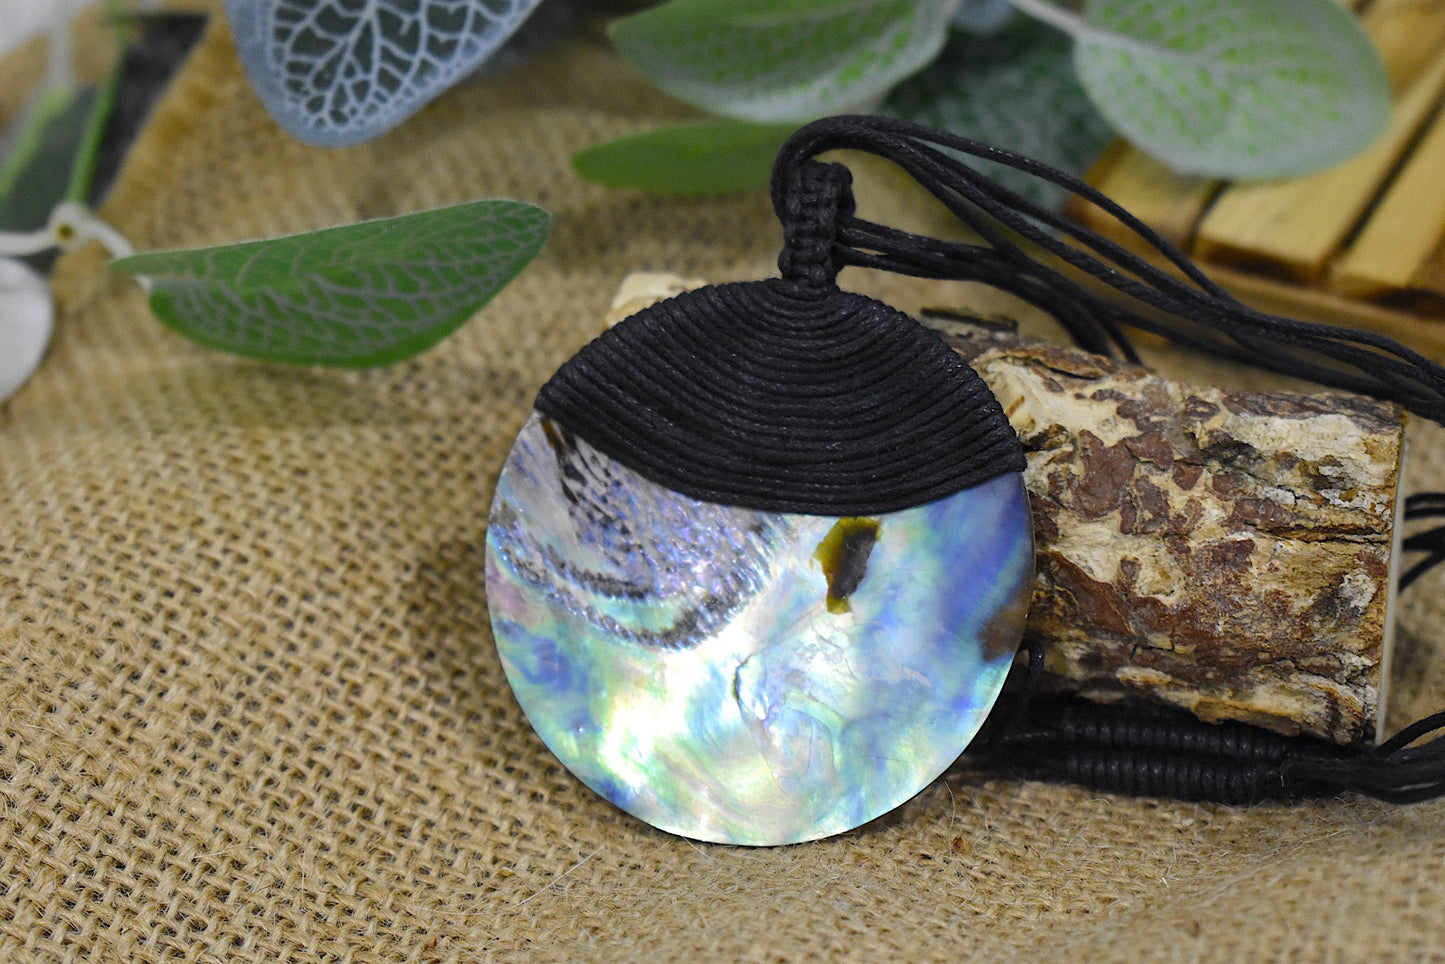 Natural Colorful Abalone Shell Pendant Charm Pendant Necklace Jewelry